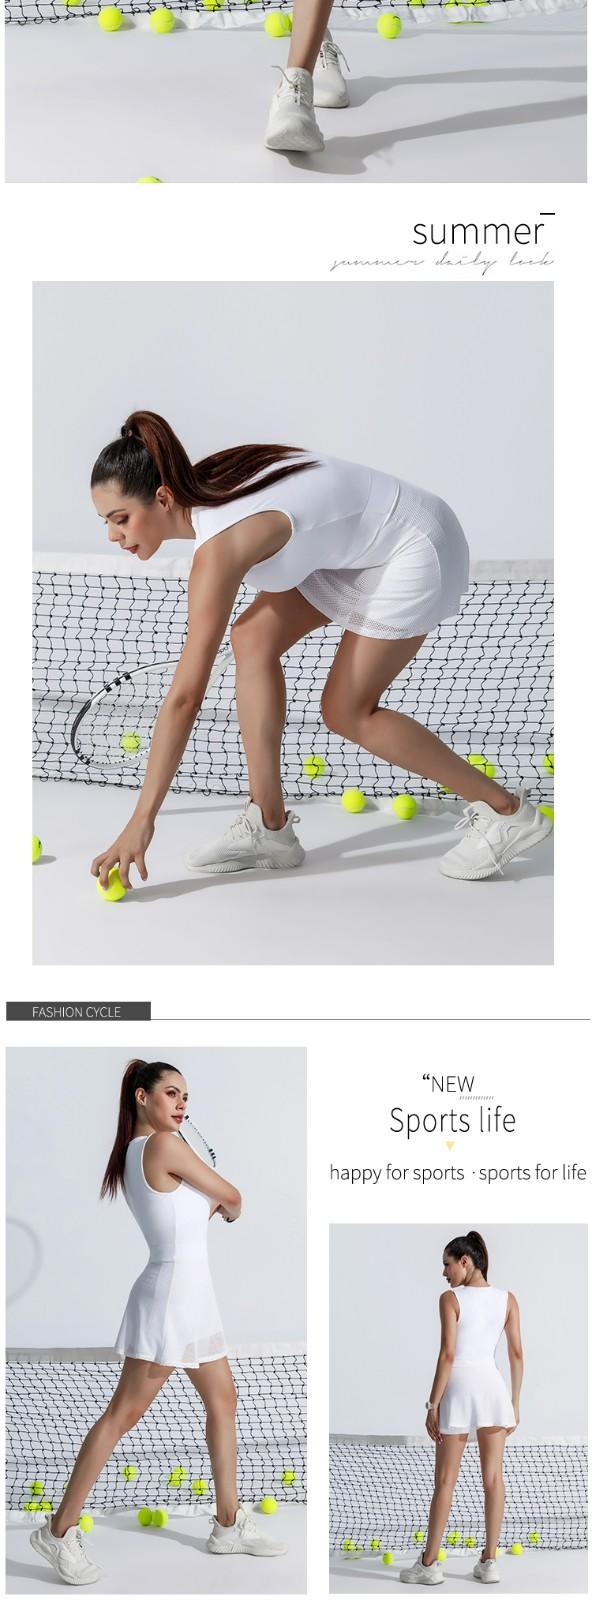 INGOR custom women's tennis outfits supplier at the gym